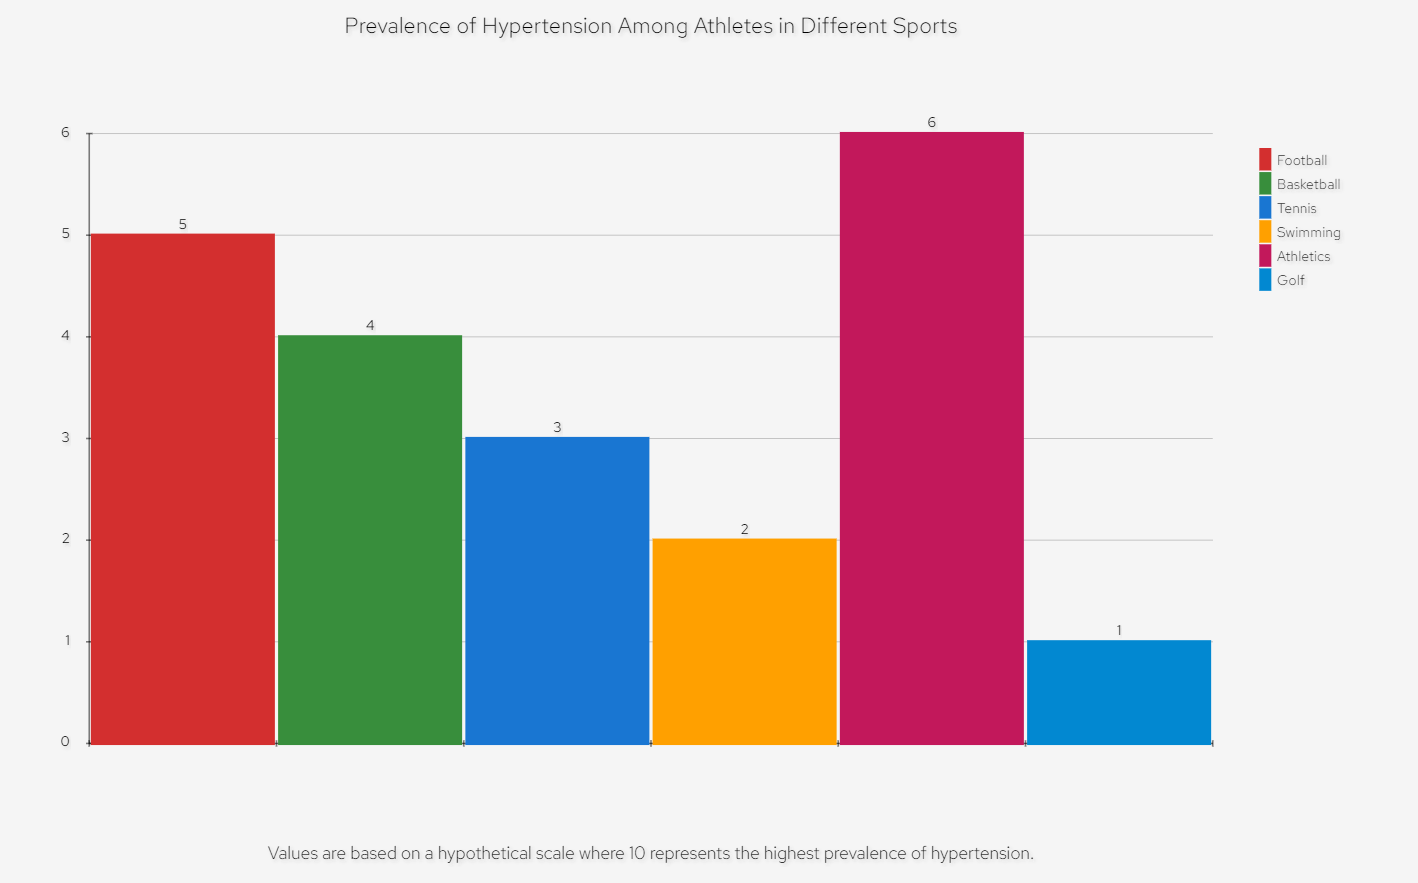 Prevalence of Hypertension Among Athletes in Different Sports